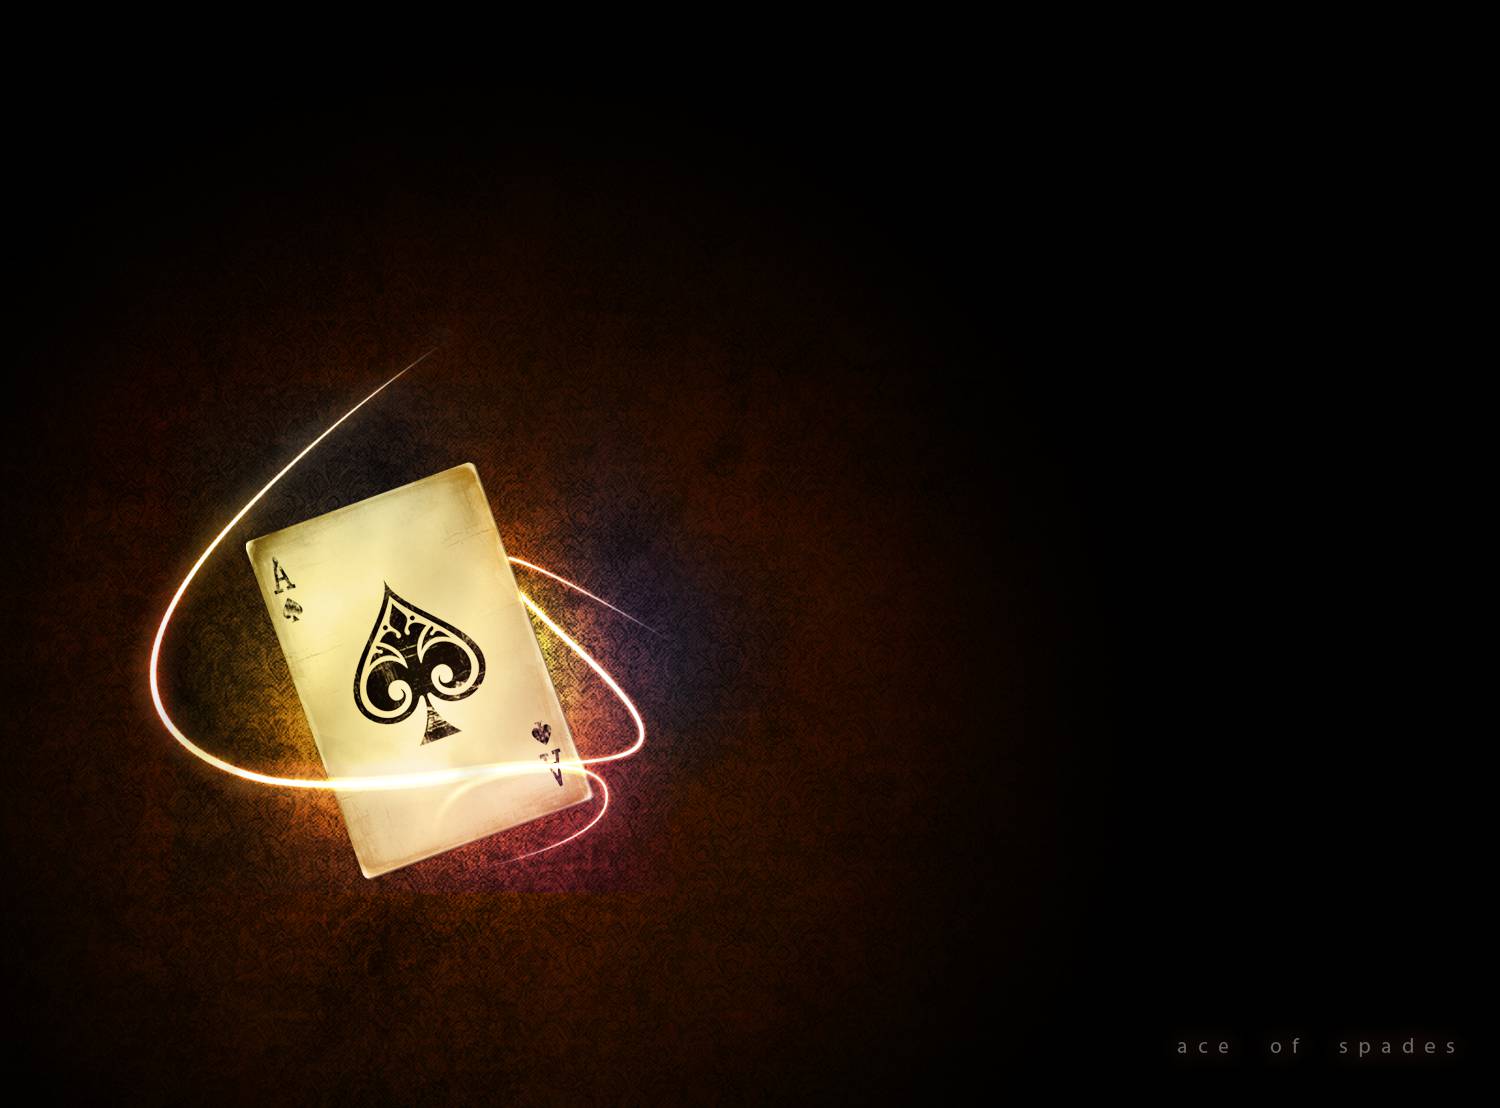 Ace Of Spades HD Wallpaper Game